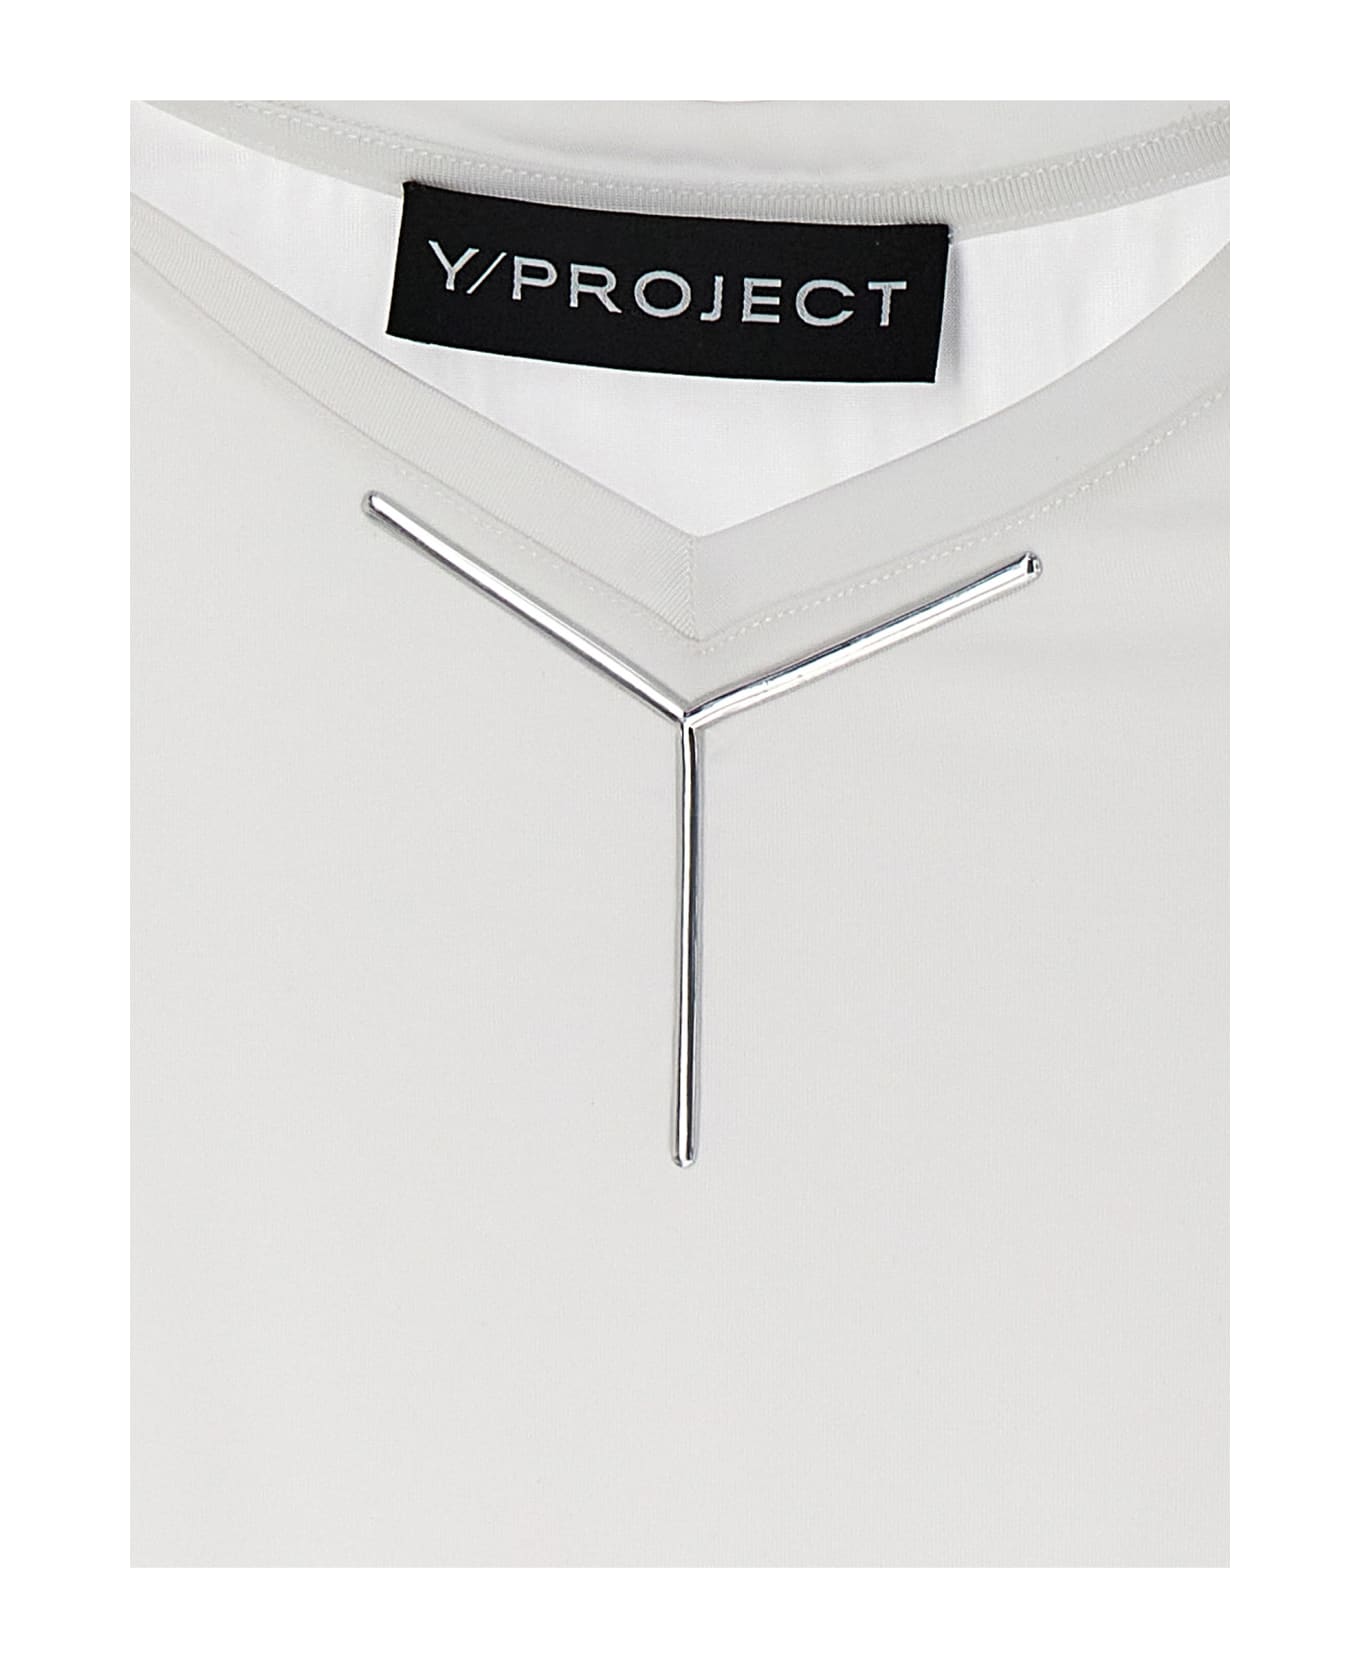 Y/Project 'y Baby Tee' T-shirt - White Tシャツ